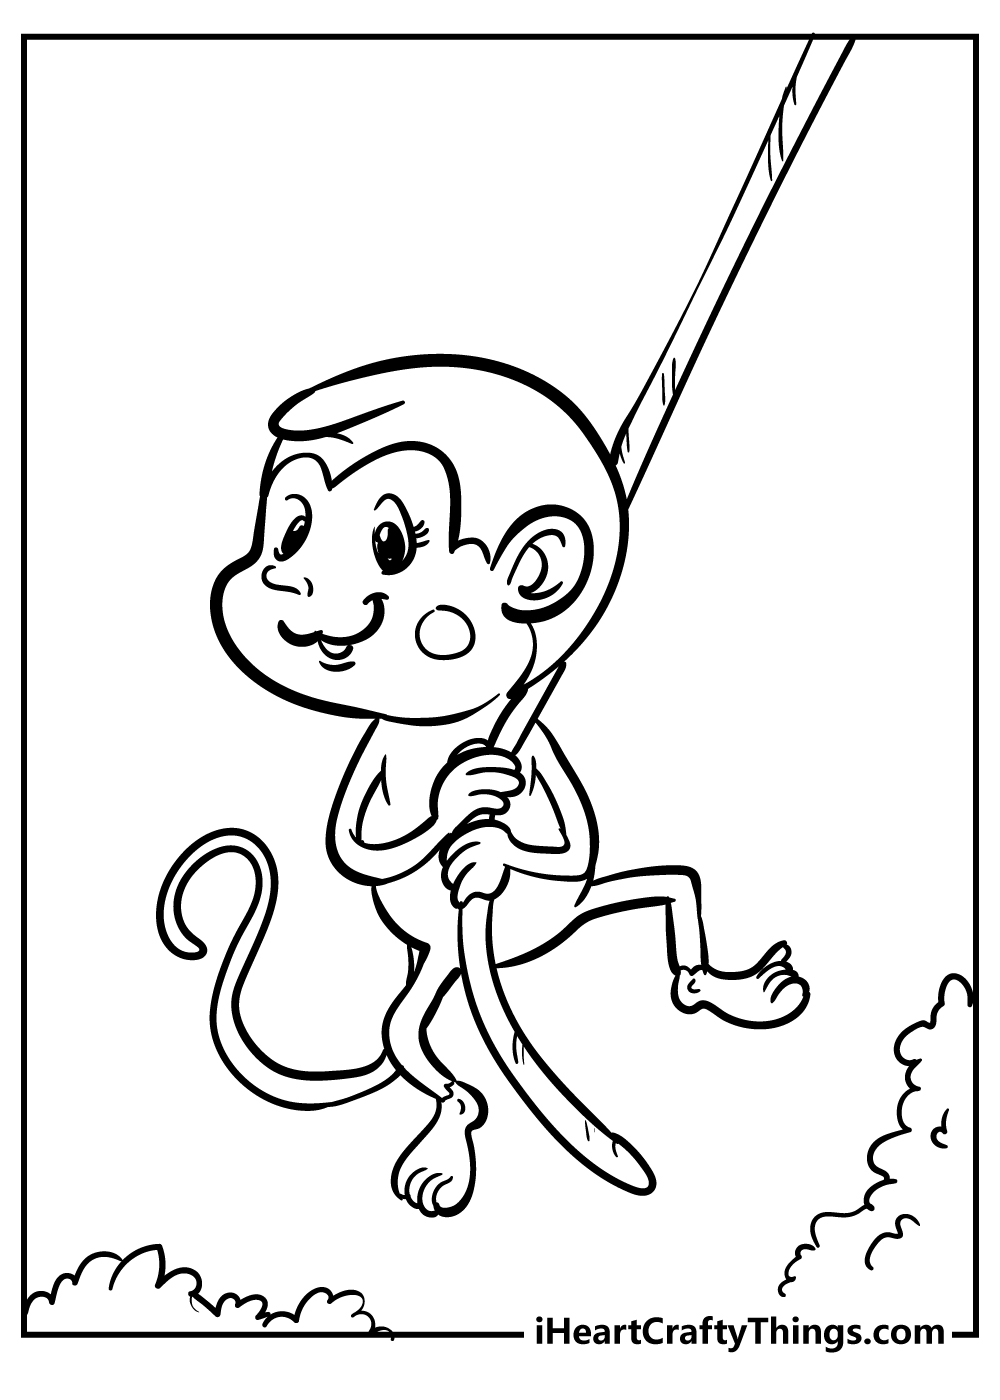 Cute Little Monkey Coloring Page Kids Animal Coloring Book Cartoon Stock  Vector by ©softflora 647428262